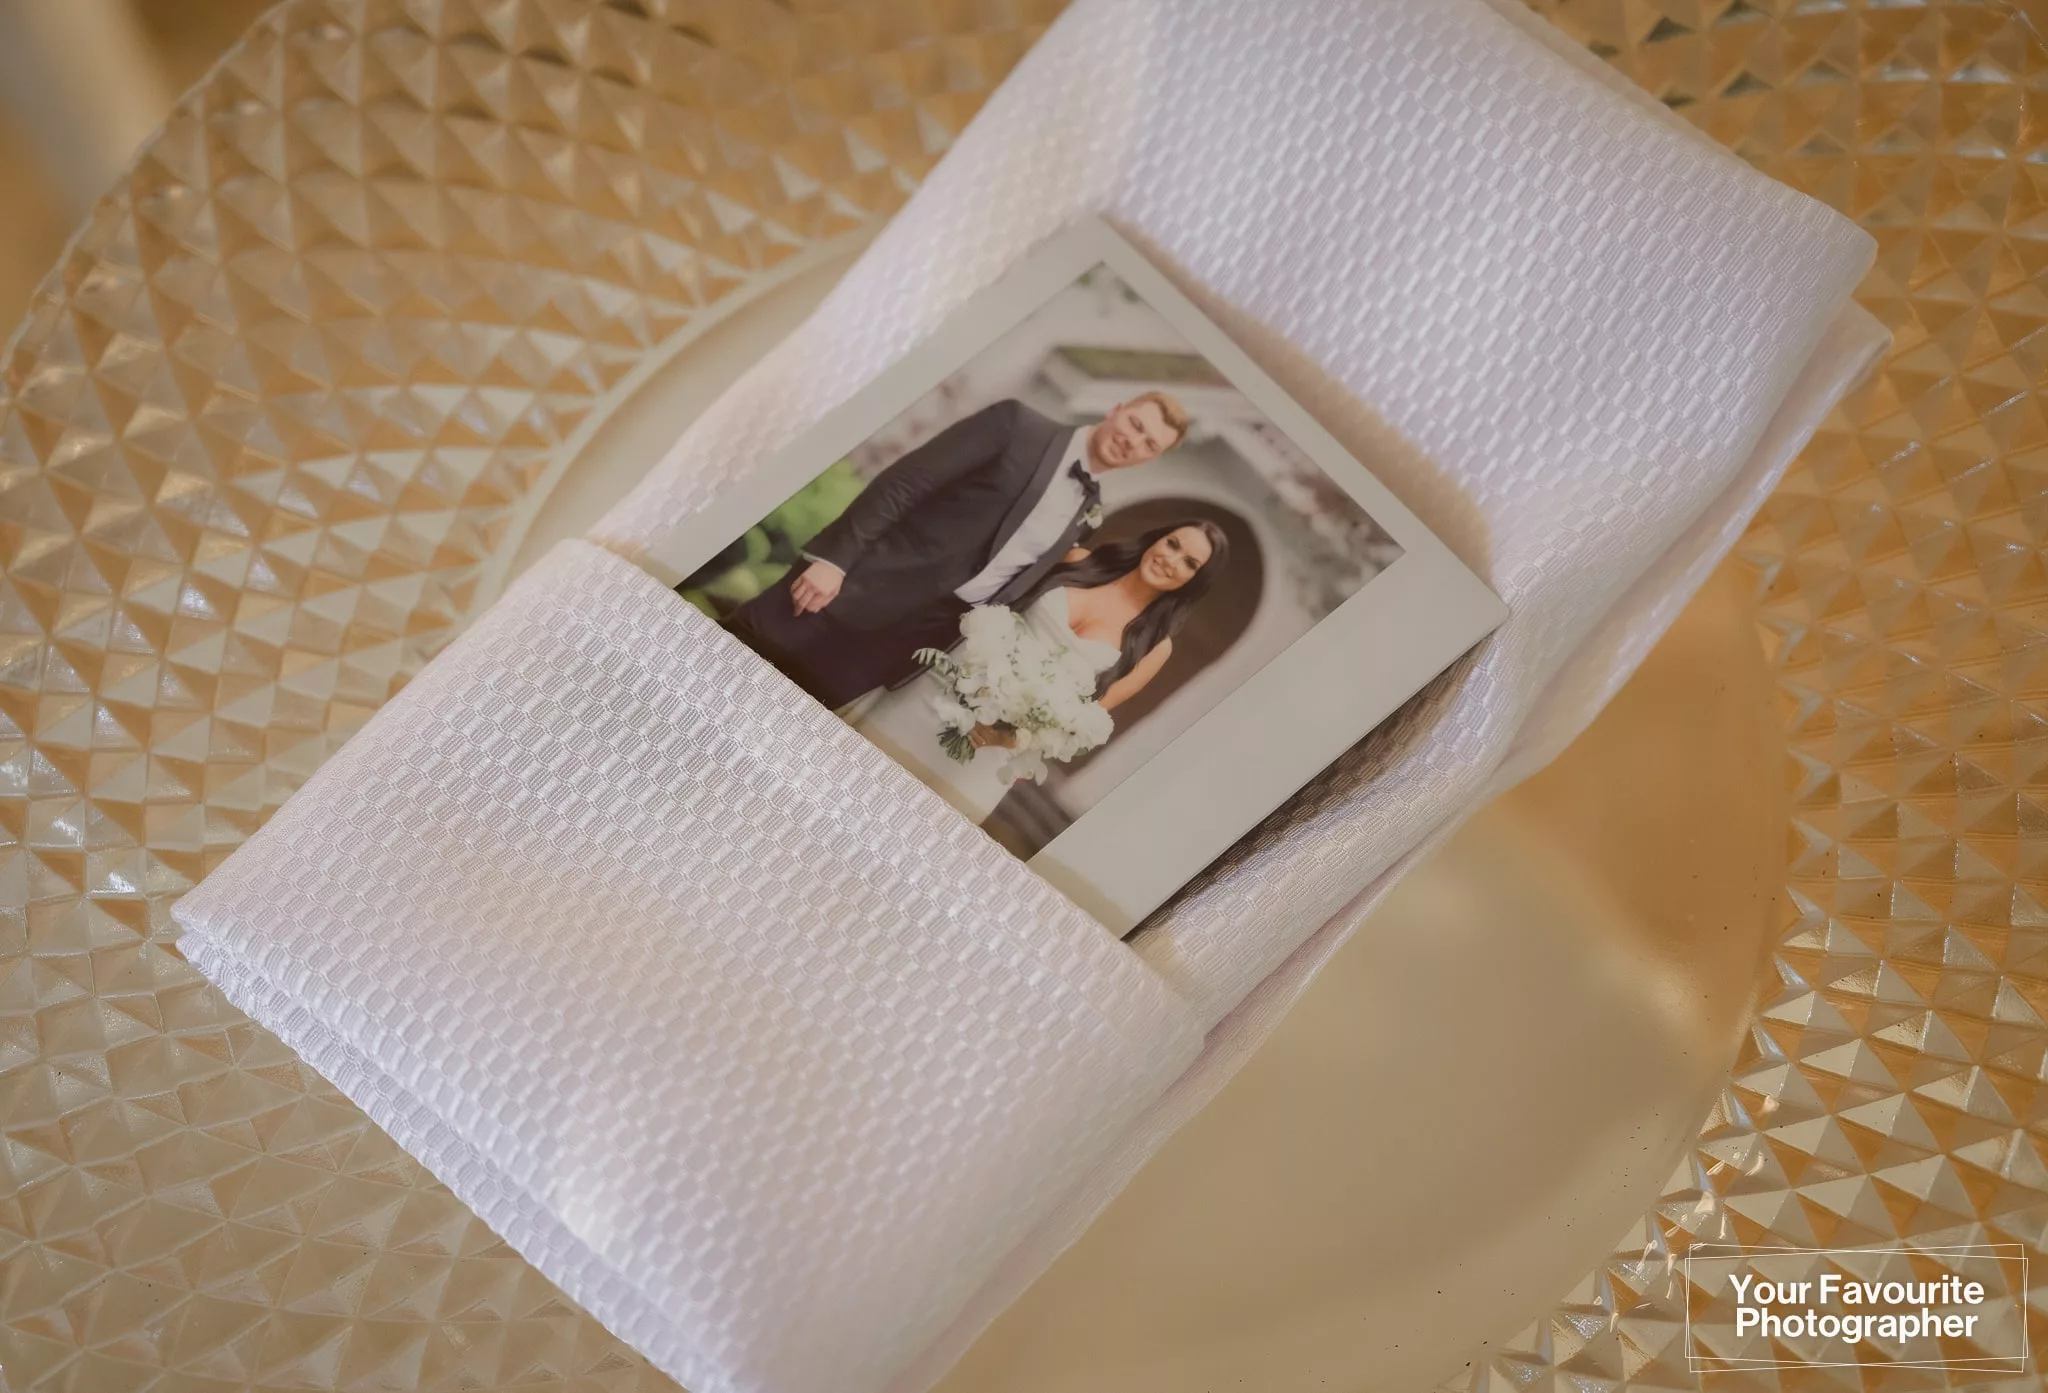 Fuji Instax photo of a bride and groom tucked into a napkin